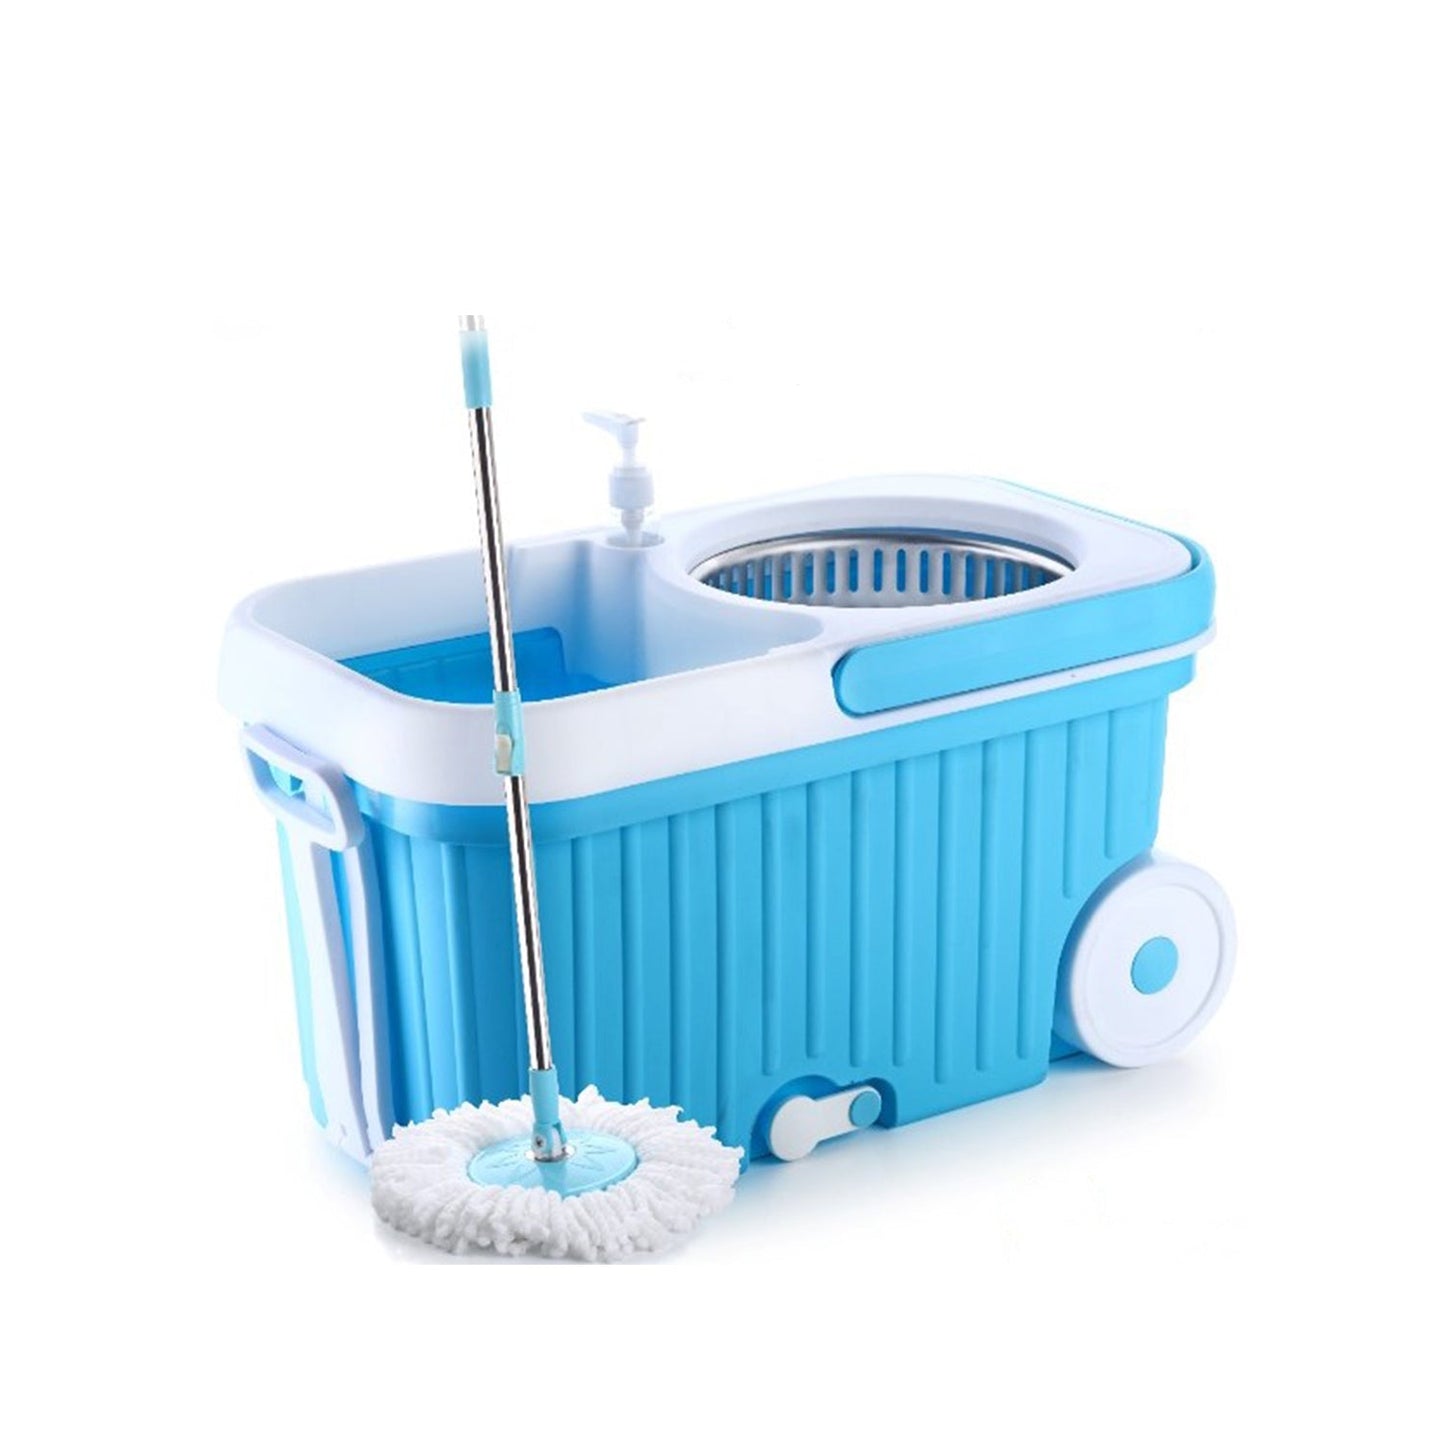 8703 Spin Mop with Bigger Wheels and Plastic Auto Fold Handle for 360 Degree Cleaning